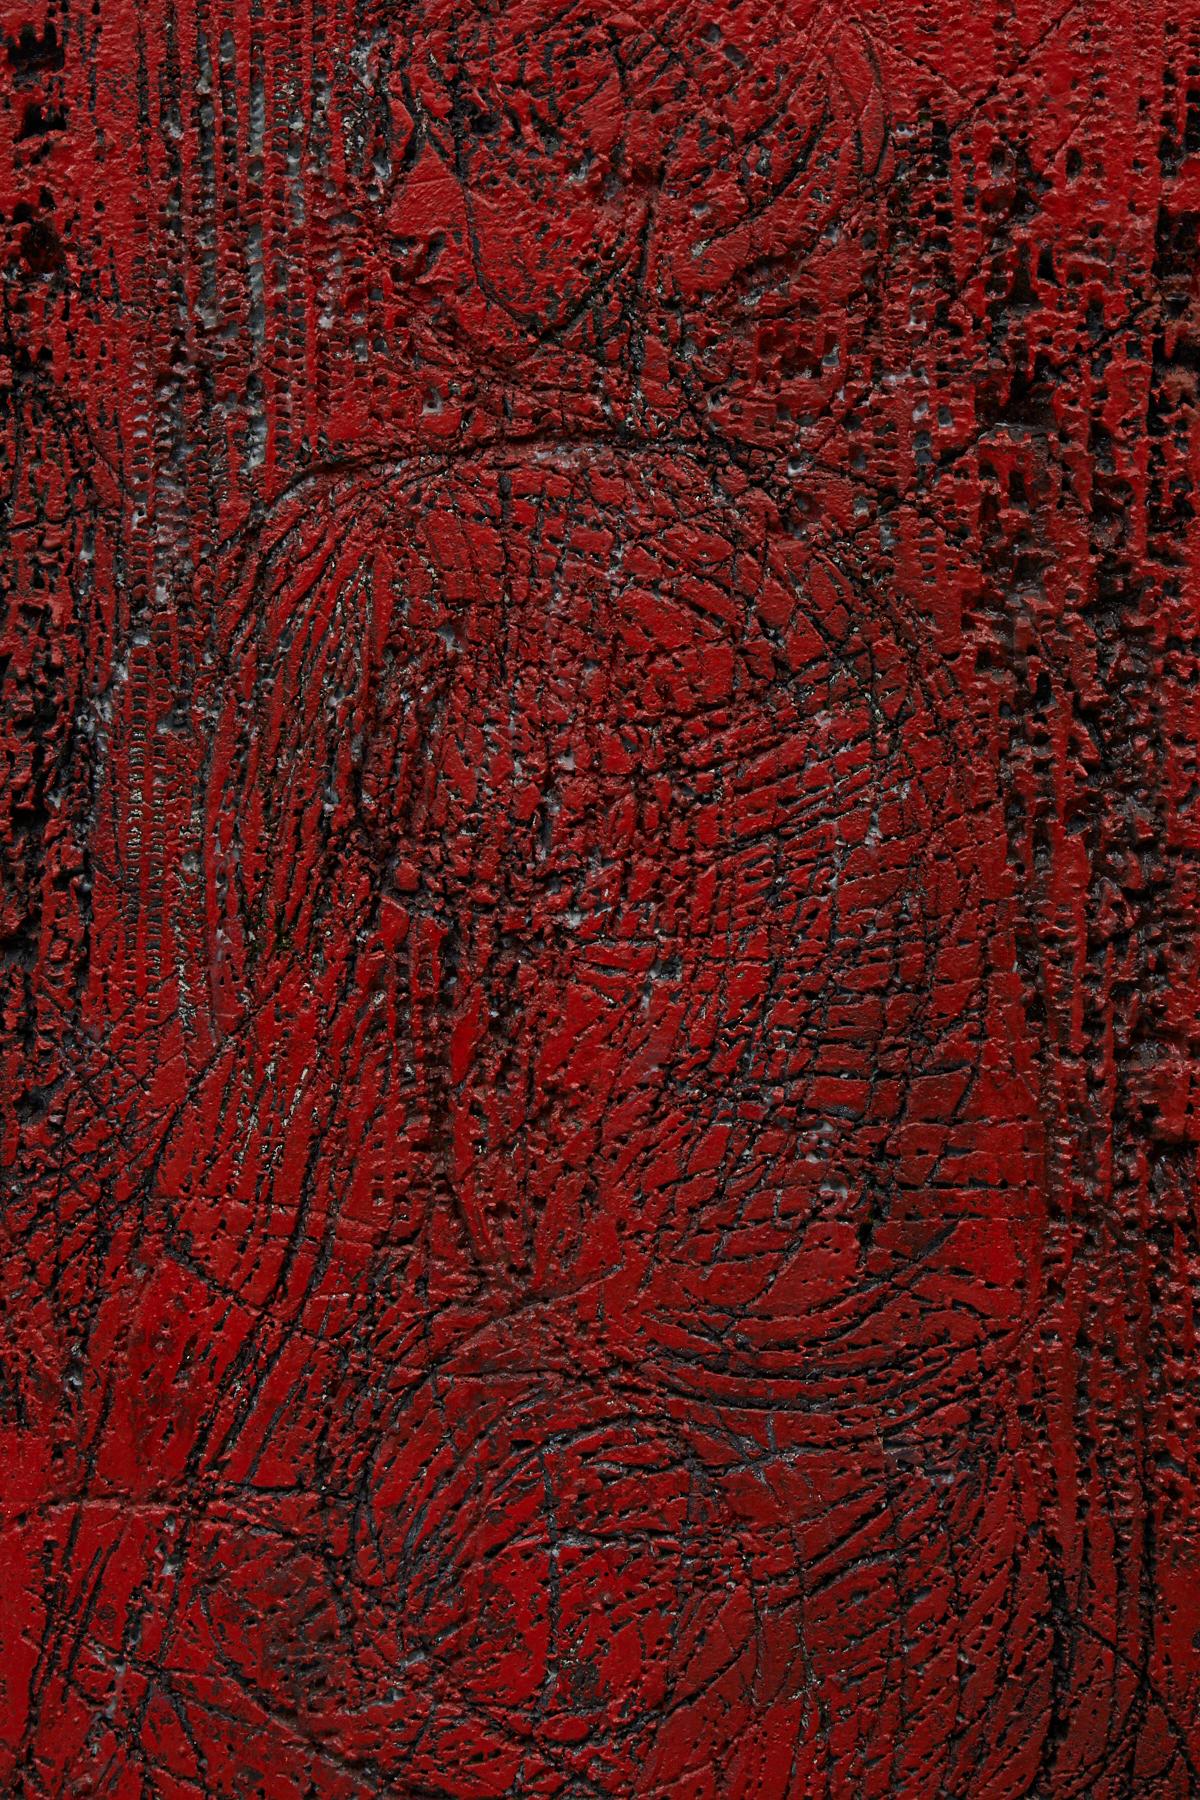 Red Seated Figure - Abstract wall sculpture made from carved and painted foam on board. Signed and titled on the back.

Sadie Hayms was a 'hylozoist artist'. Hylozoism is the doctrine that all matter has life. The idea for the first Hylozoist Art